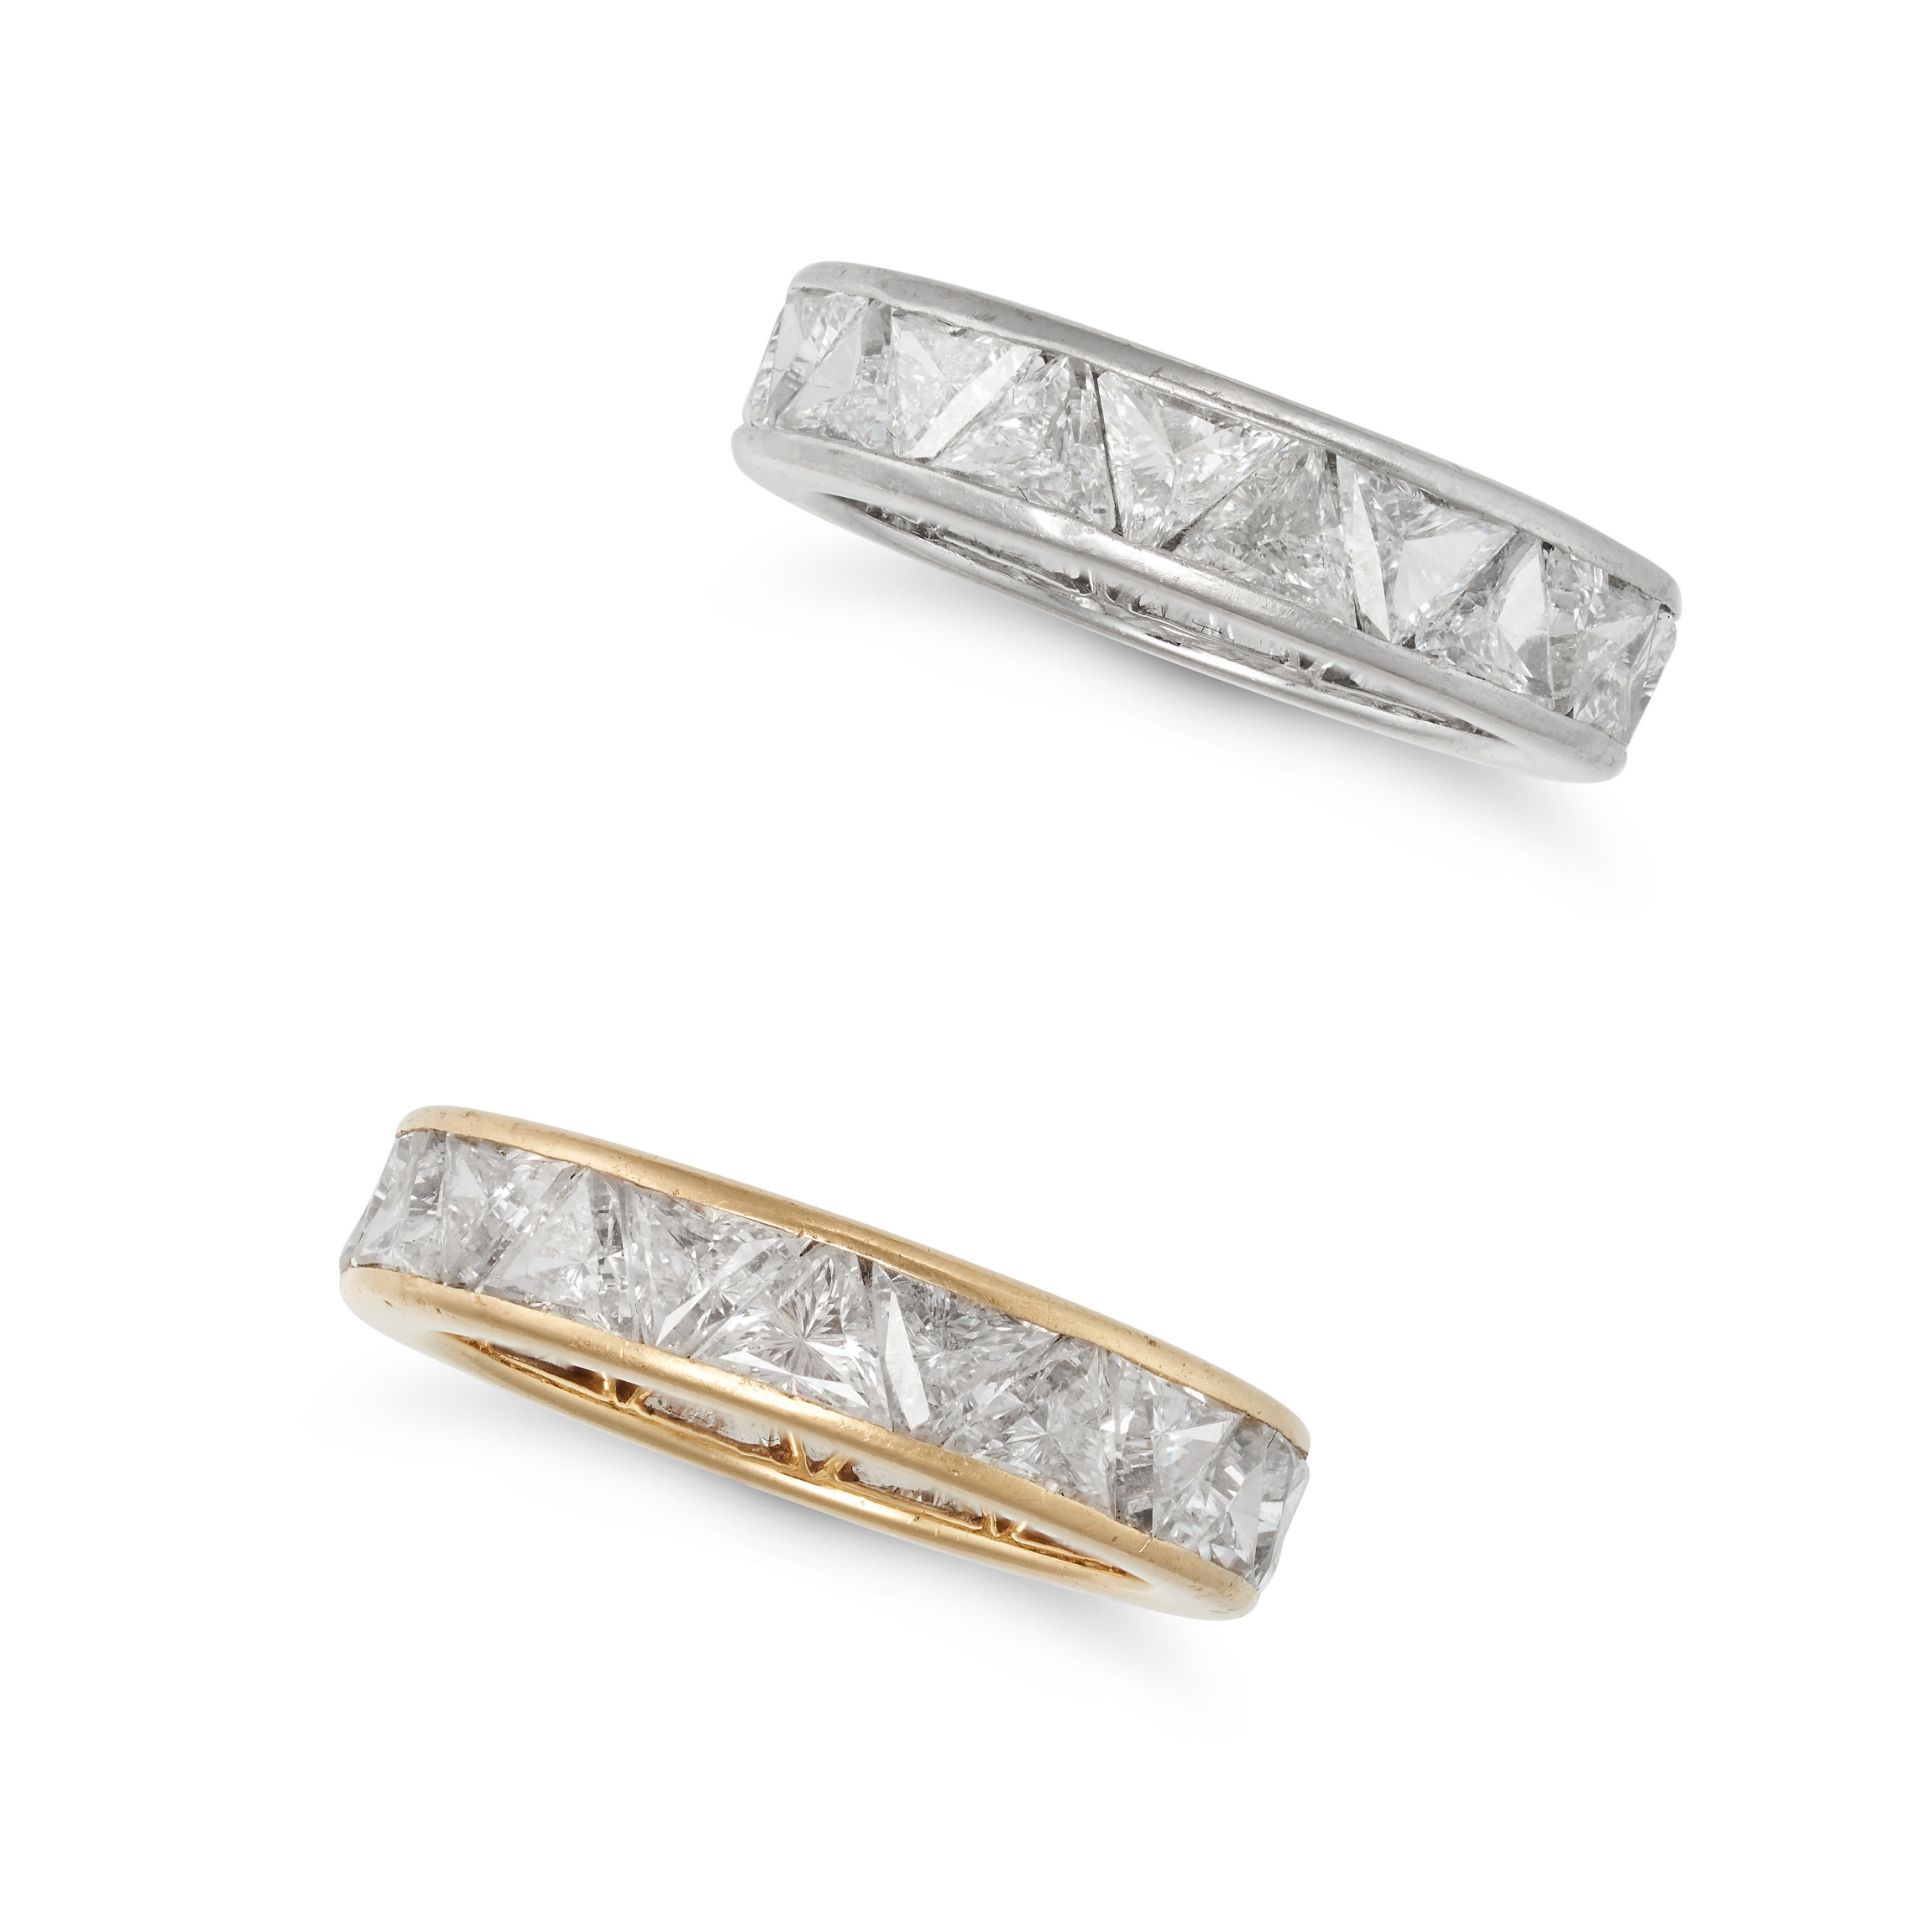 HARRY WINSTON, A PAIR OF DIAMOND ETERNITY RINGS in 18ct yellow gold and platinum, each in identic...